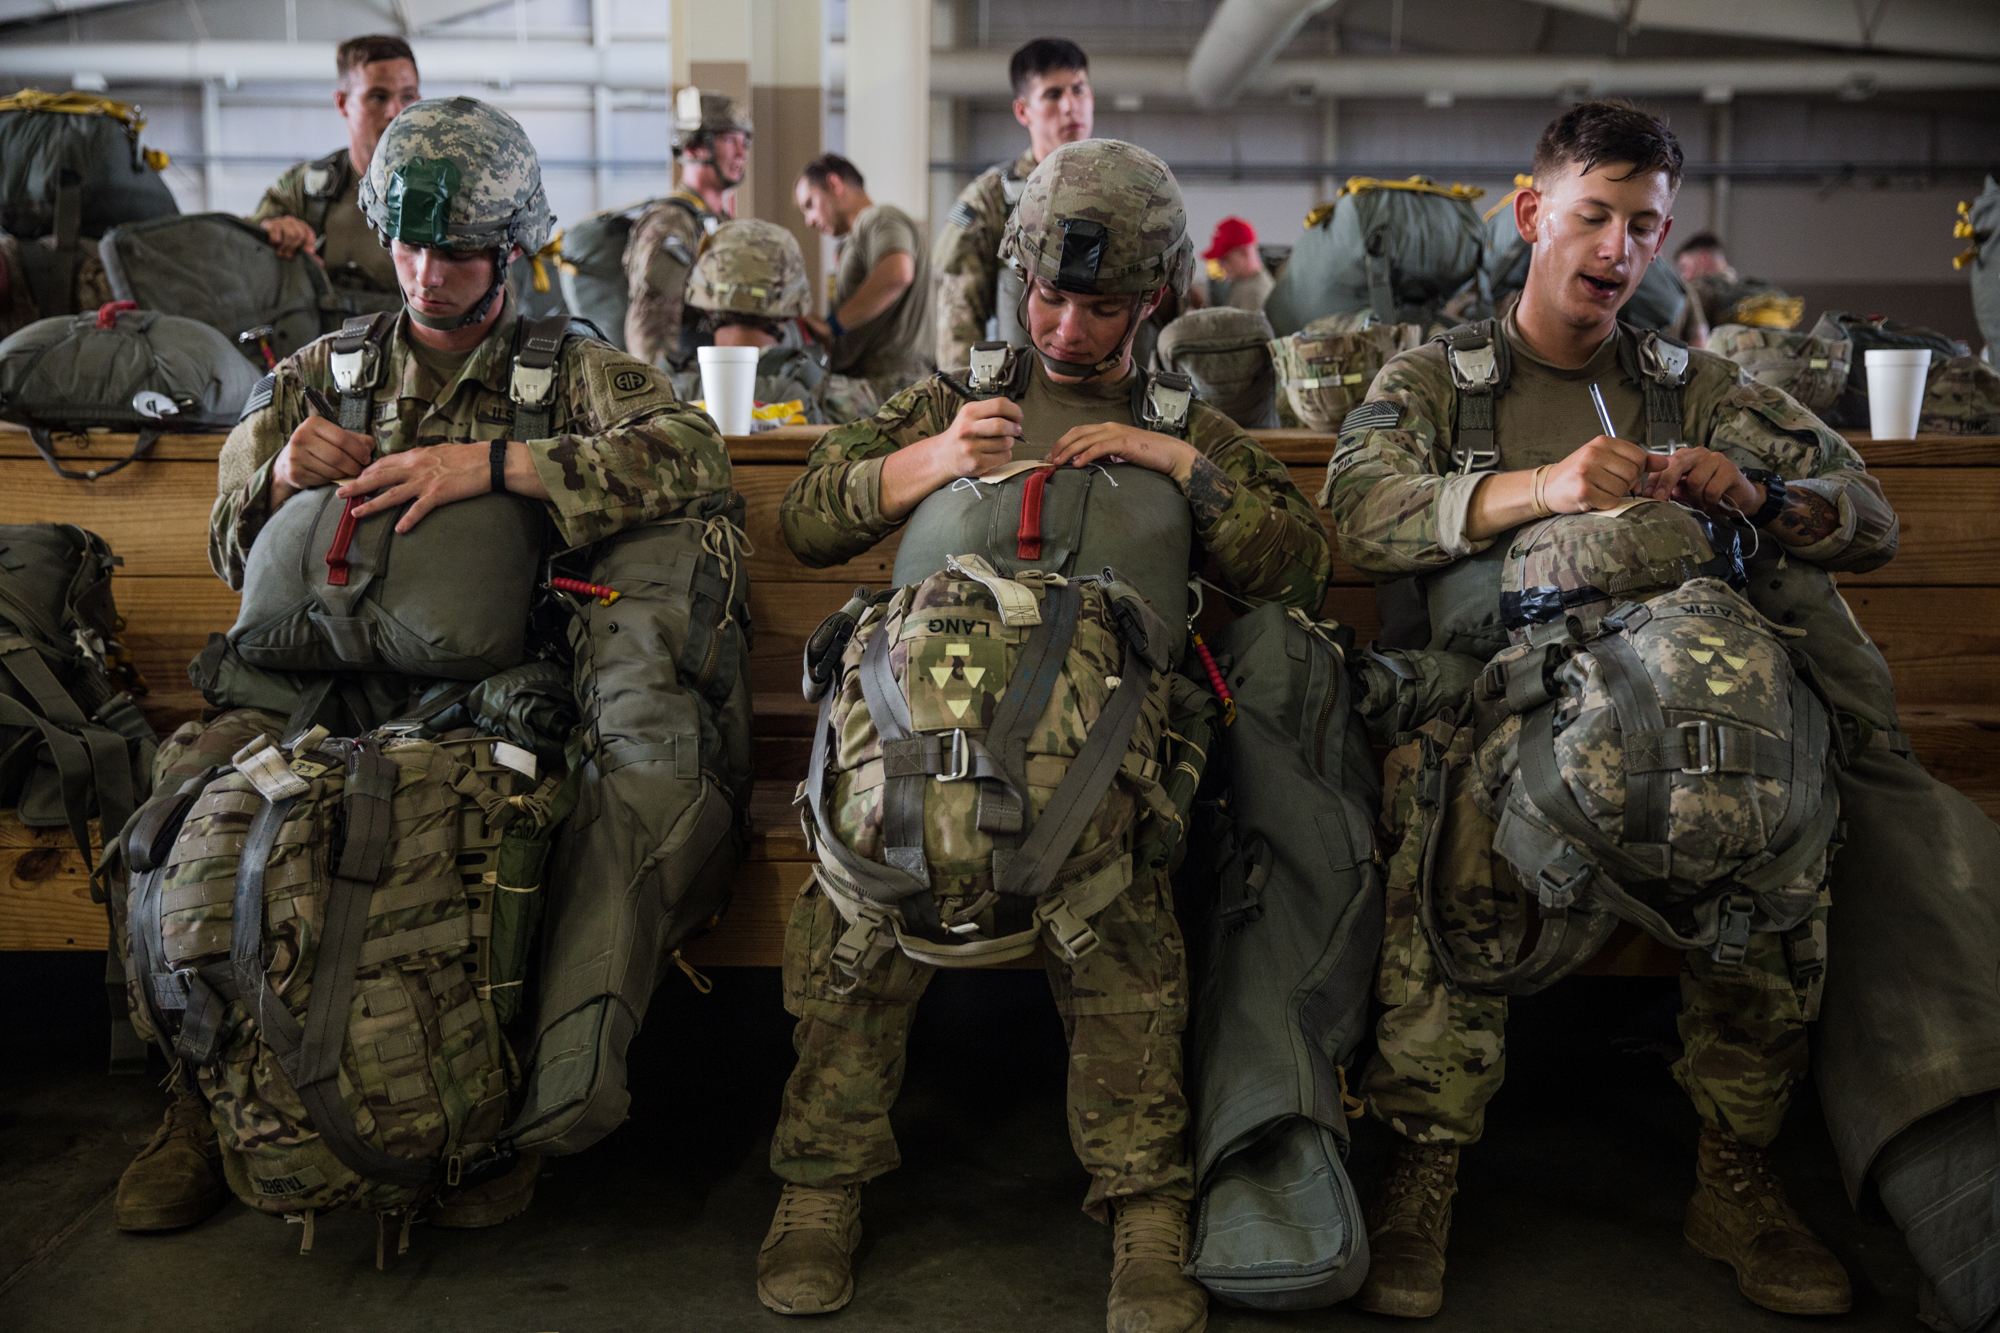  Paratroopers Talbert, Lang and Capik of the 82nd Airborne Division write their name, rank, and unit on name cards before an upcoming training jump at Fort Bragg, N.C. on July 26, 2017. 